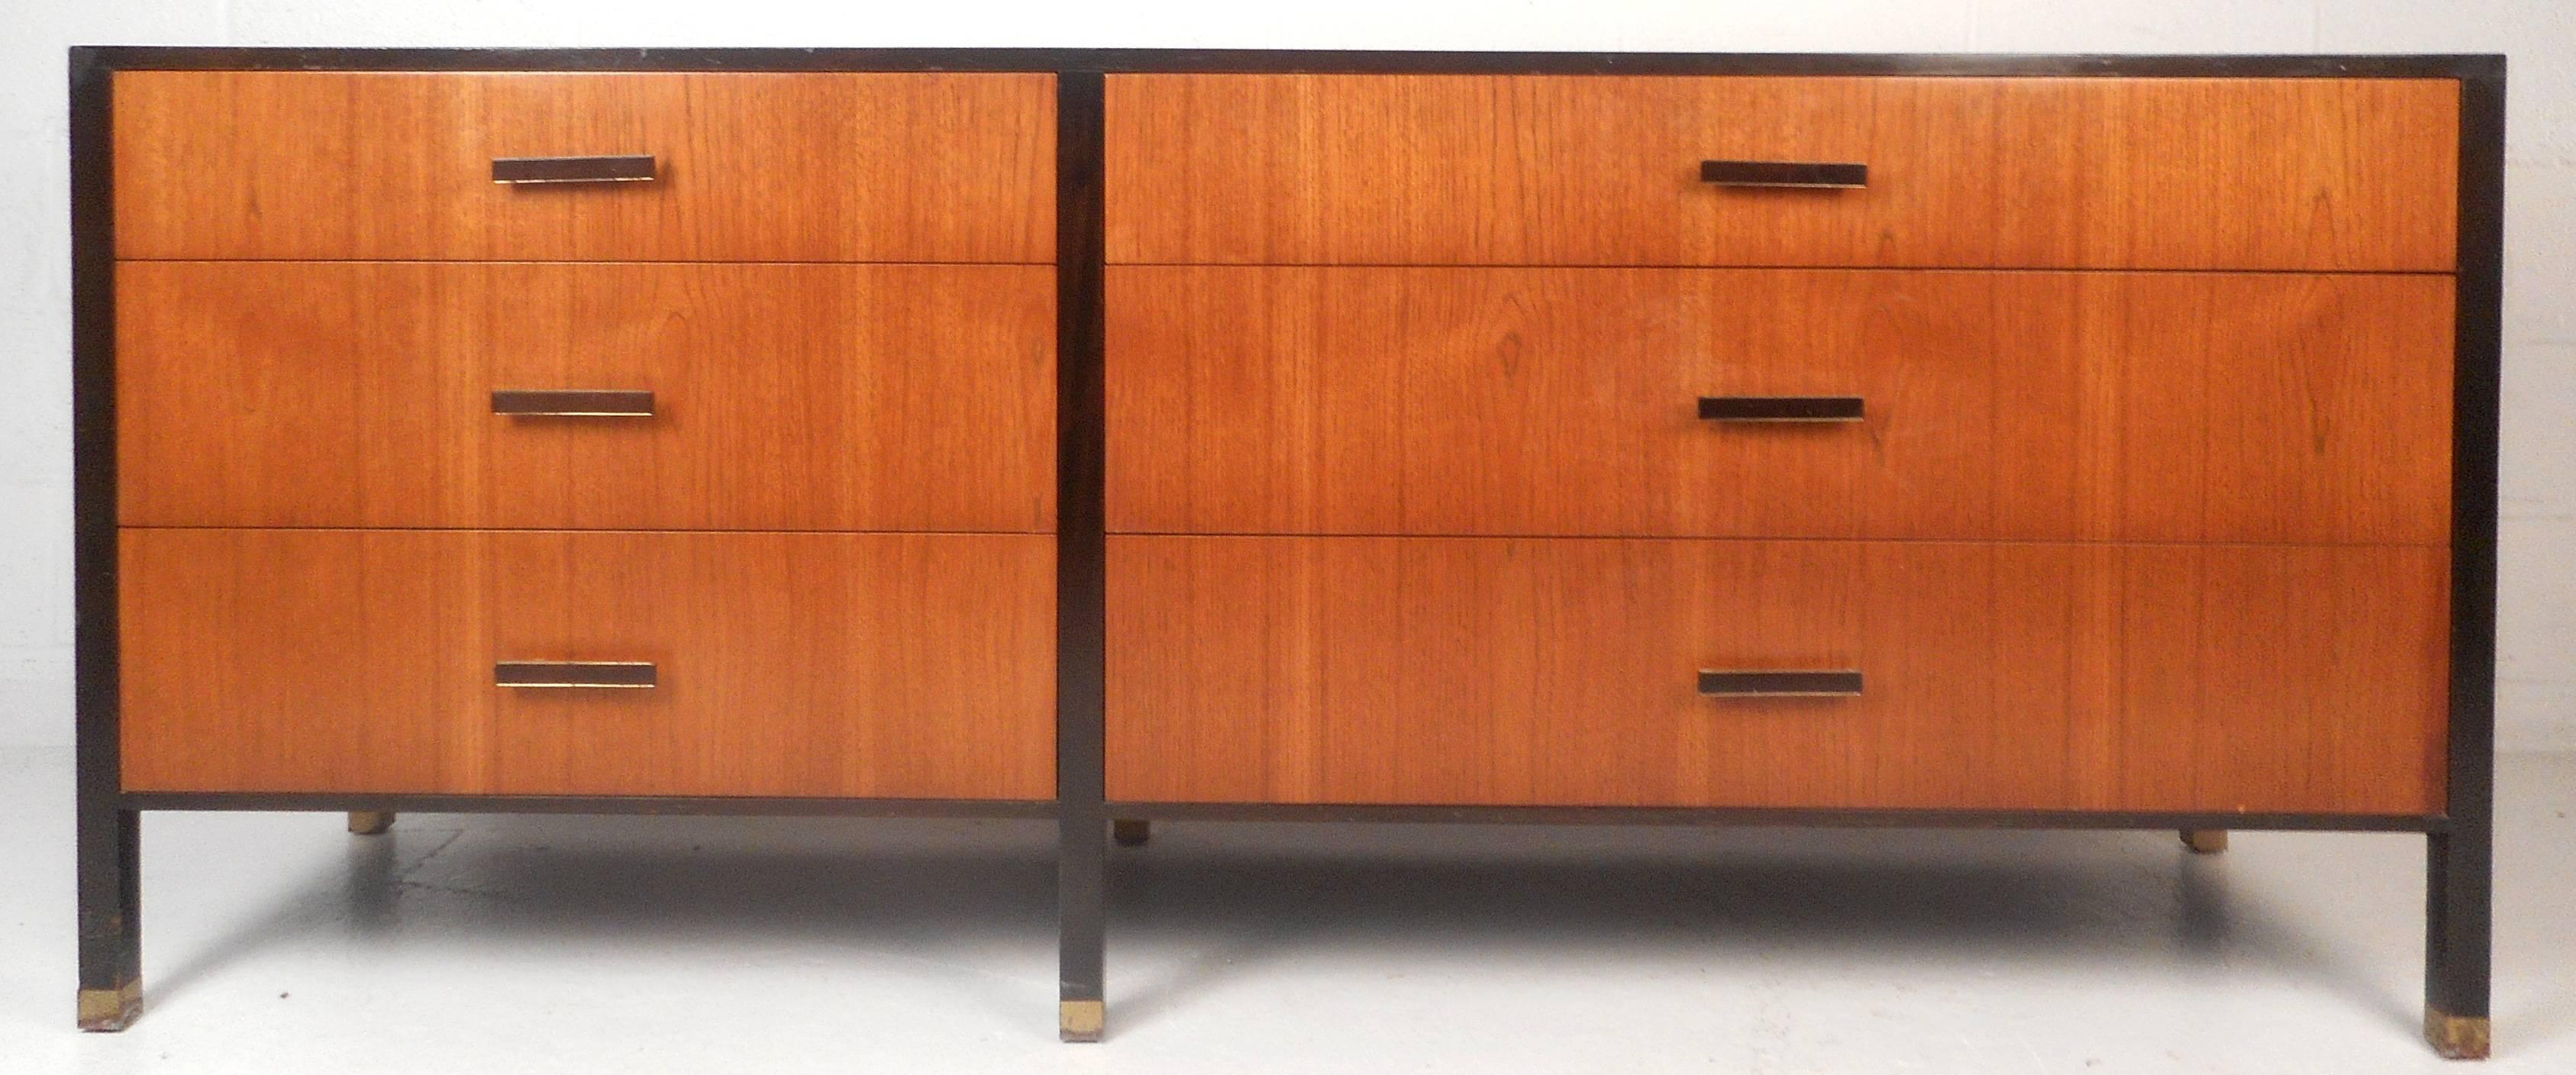 Impressive vintage modern dresser features six large drawers with unique brass and wood pulls. Stylish two-tone design has ebonized wood trim on the top and the legs. Beautiful case piece with brass capped feet offers plenty of room for storage.